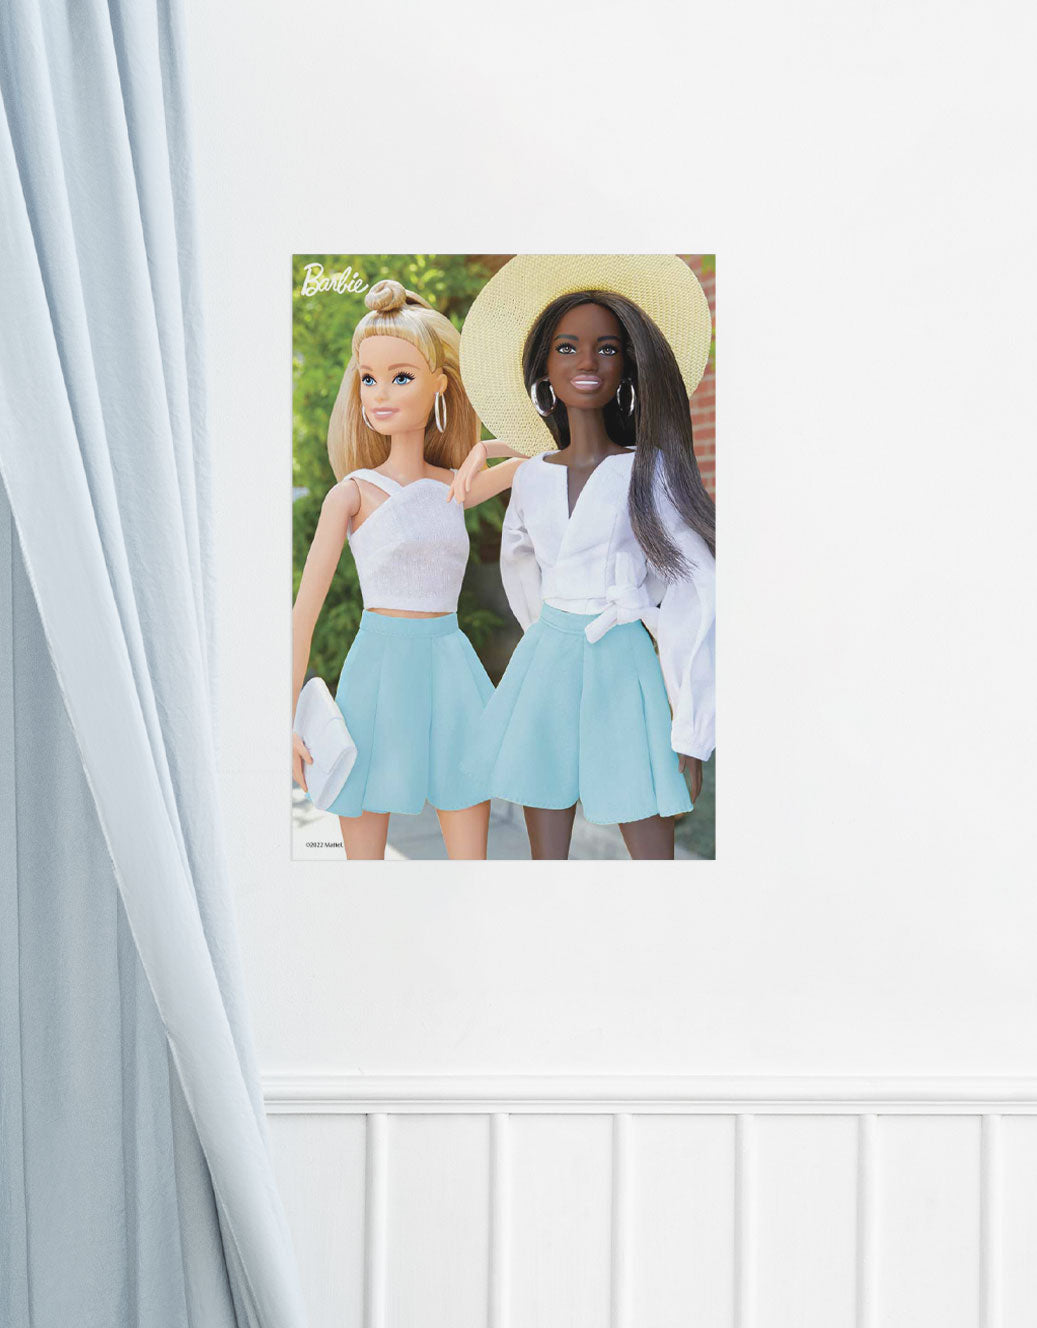 Barbie Matching Outfits A3 Wall Art